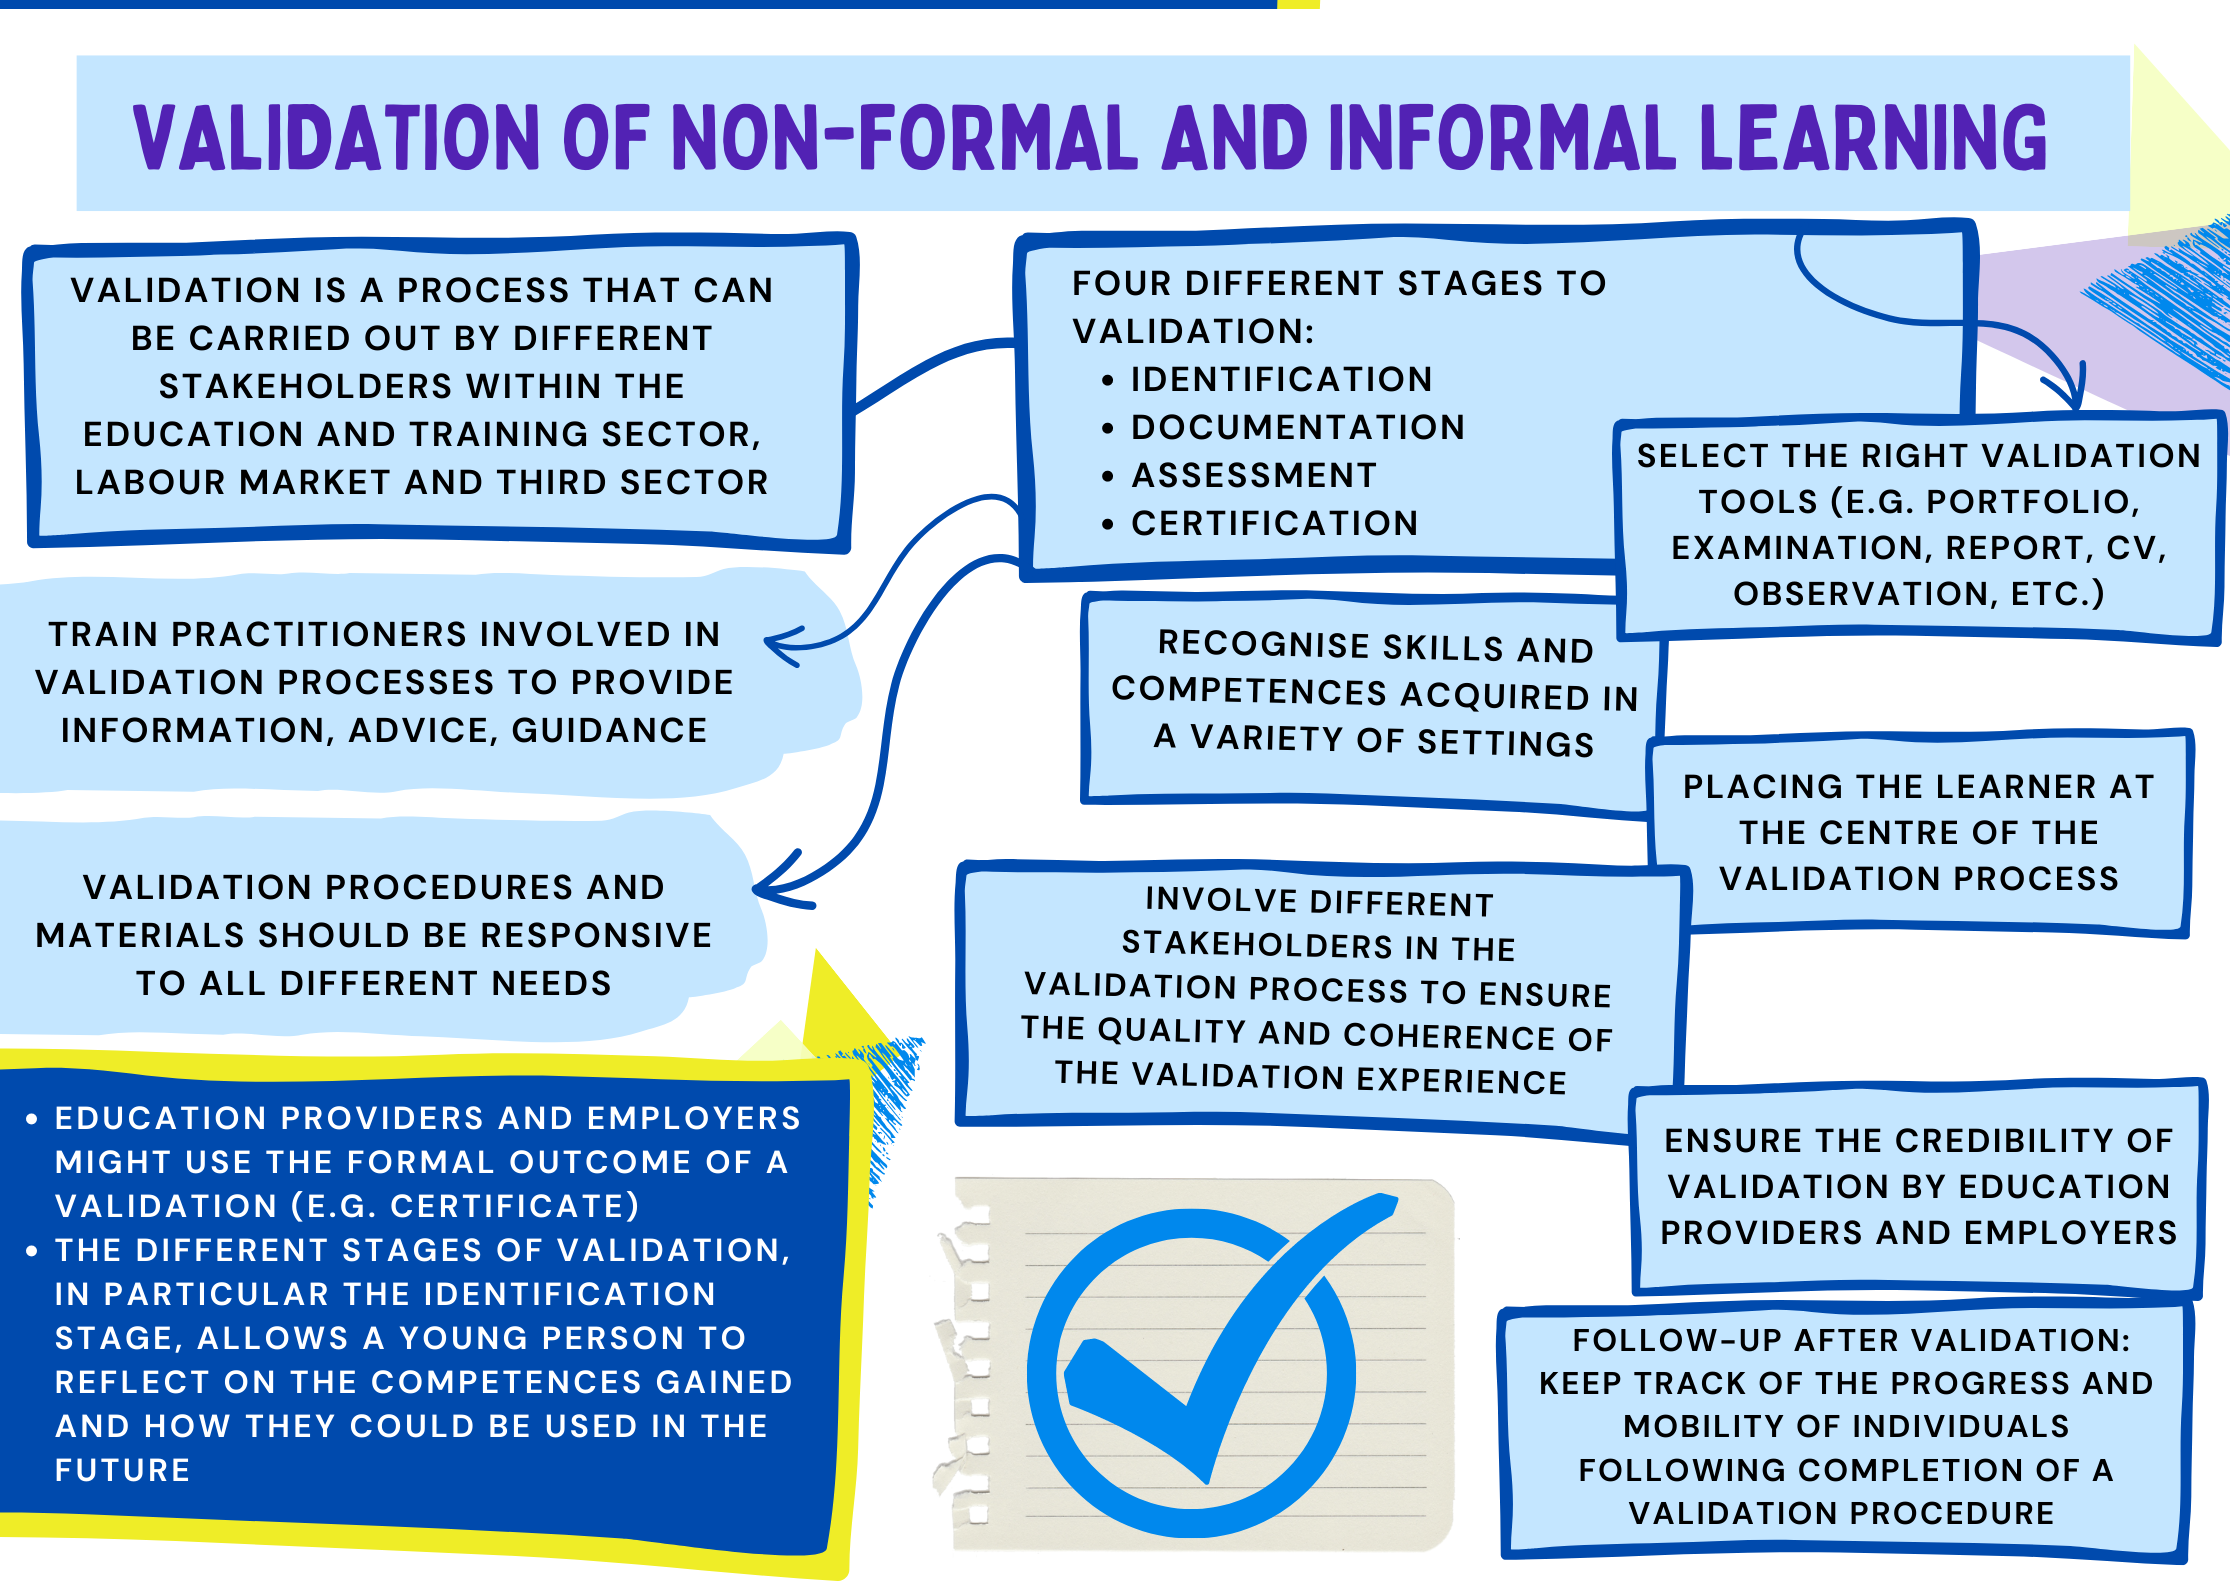 19_validation of non-formal and informal learning